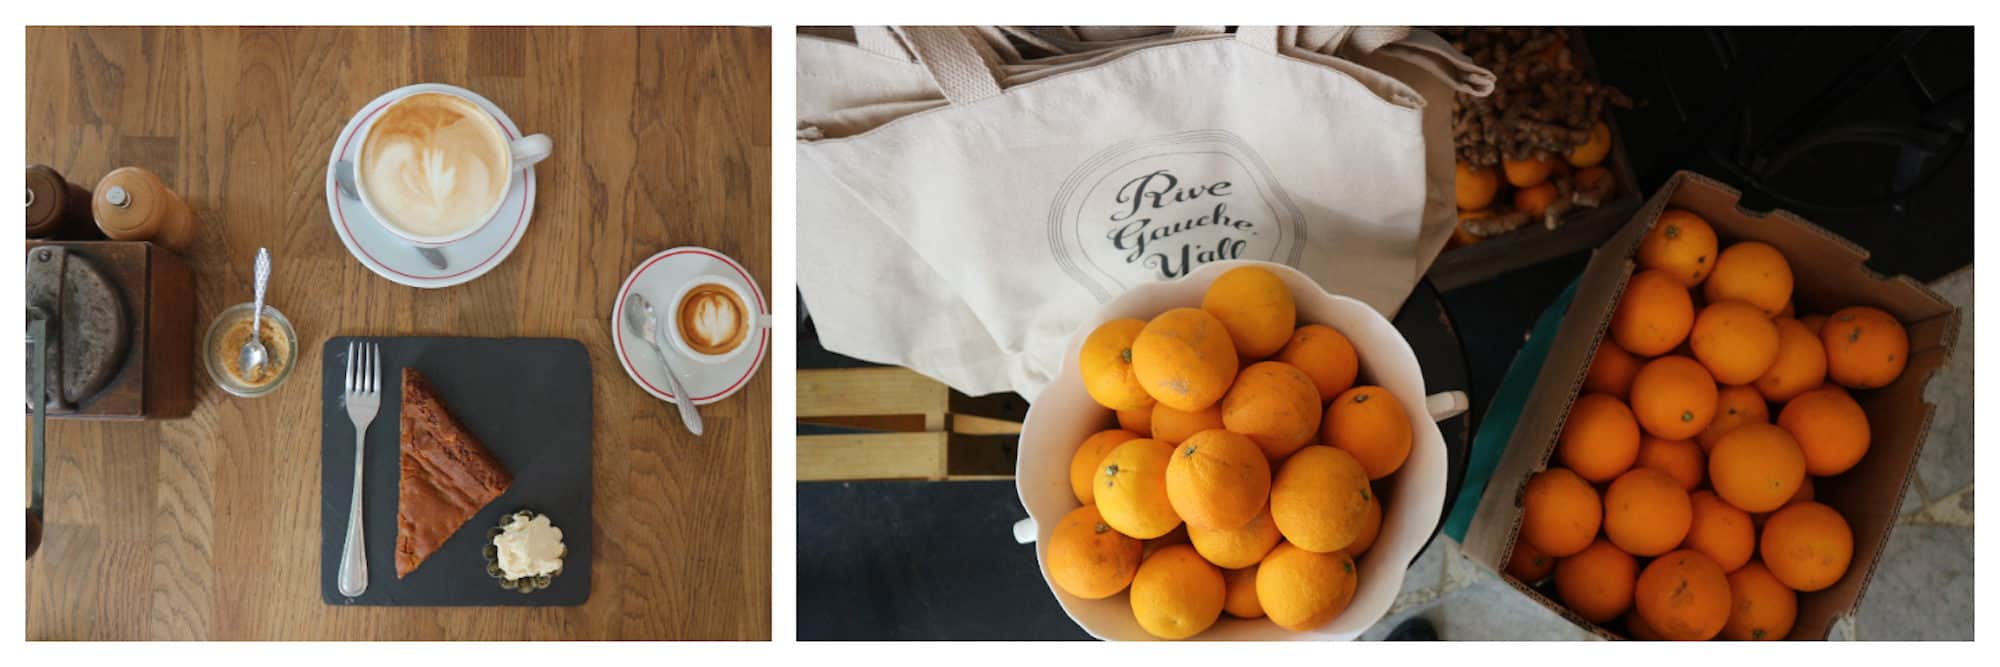 Warm home-made chocolate cake with ice cream on a slate plate with creamy coffee on a wooden table (left) and bowls of fresh oranges with a white tote bag (right) at Treize au Jardin coffee shop in Paris 